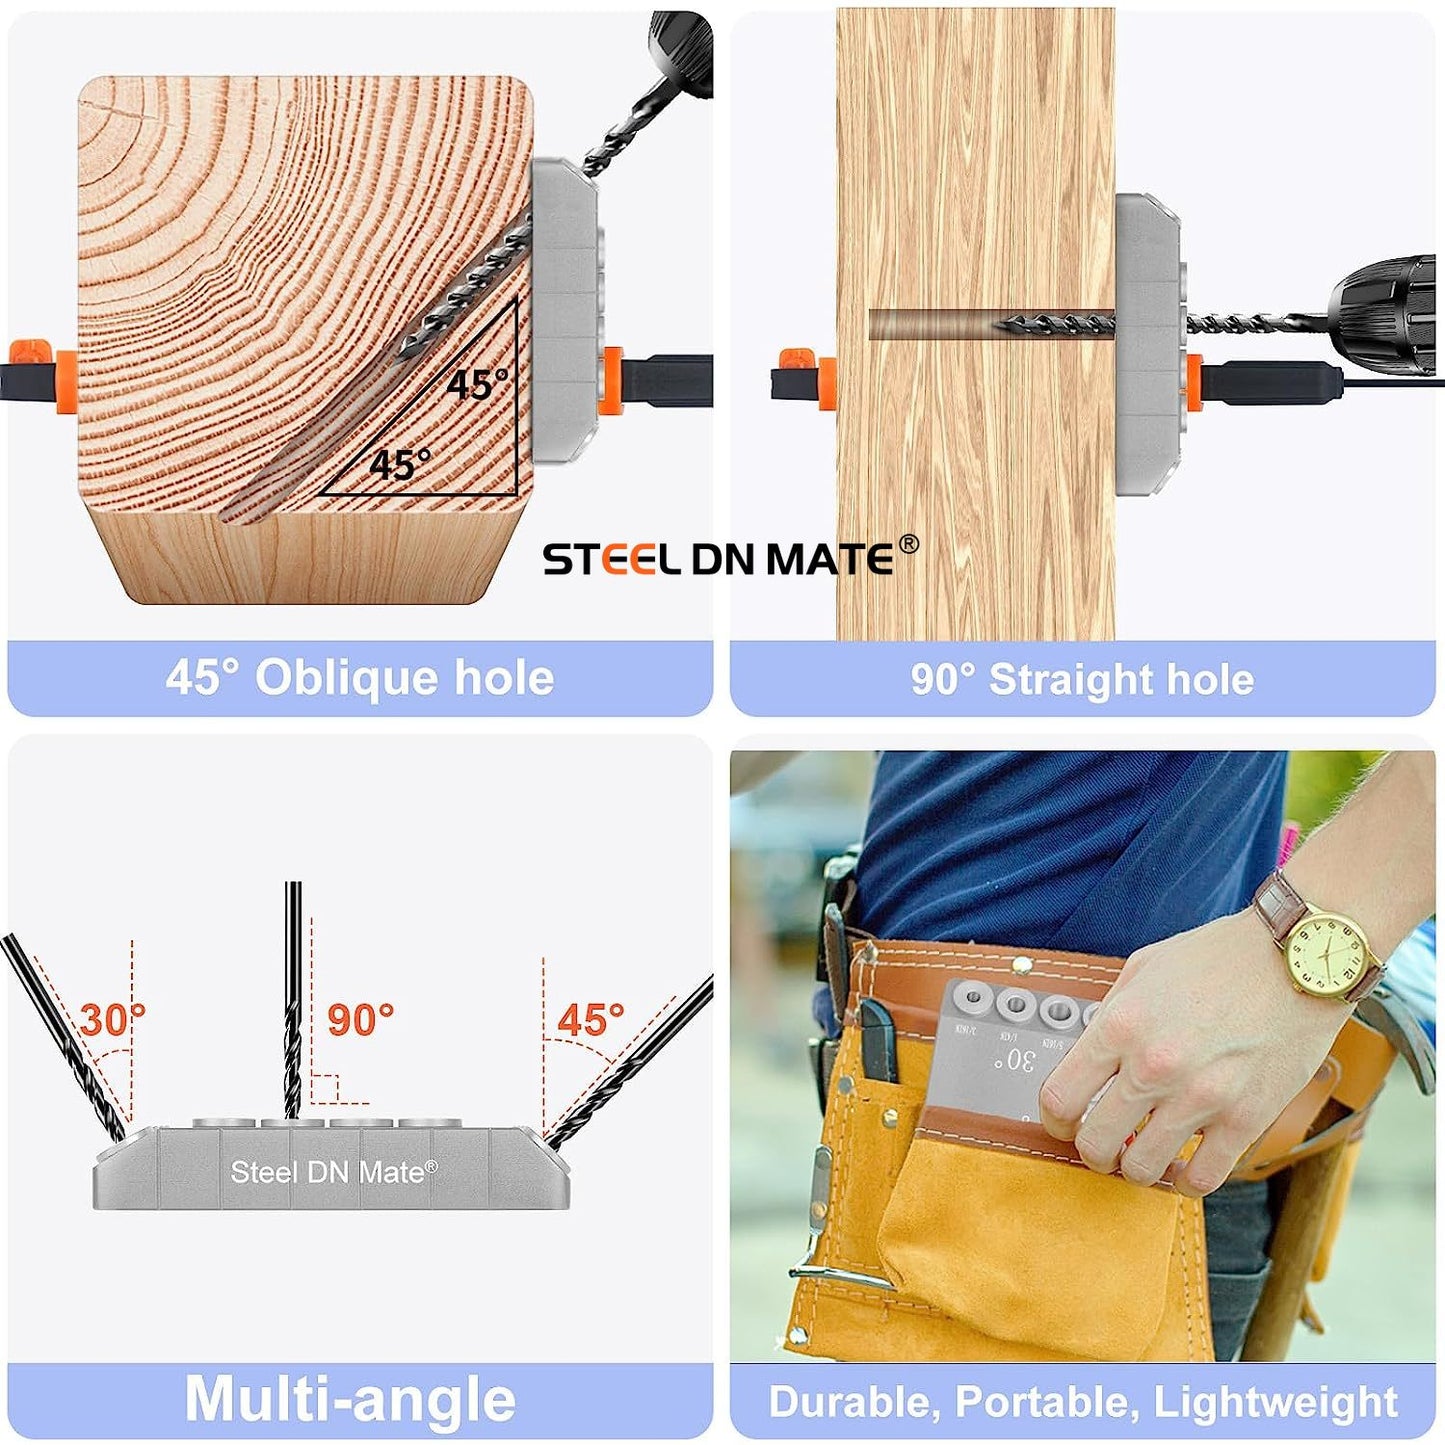 Steel DN Mate 30 45 90 Degree Angle 4 Sizes Drill Hole Guide Jig for Angled and Straight Hole, Portable Deck Cable Railing Lag Screw Drilling Template Block for Horizontal Cable Wood Post Silver